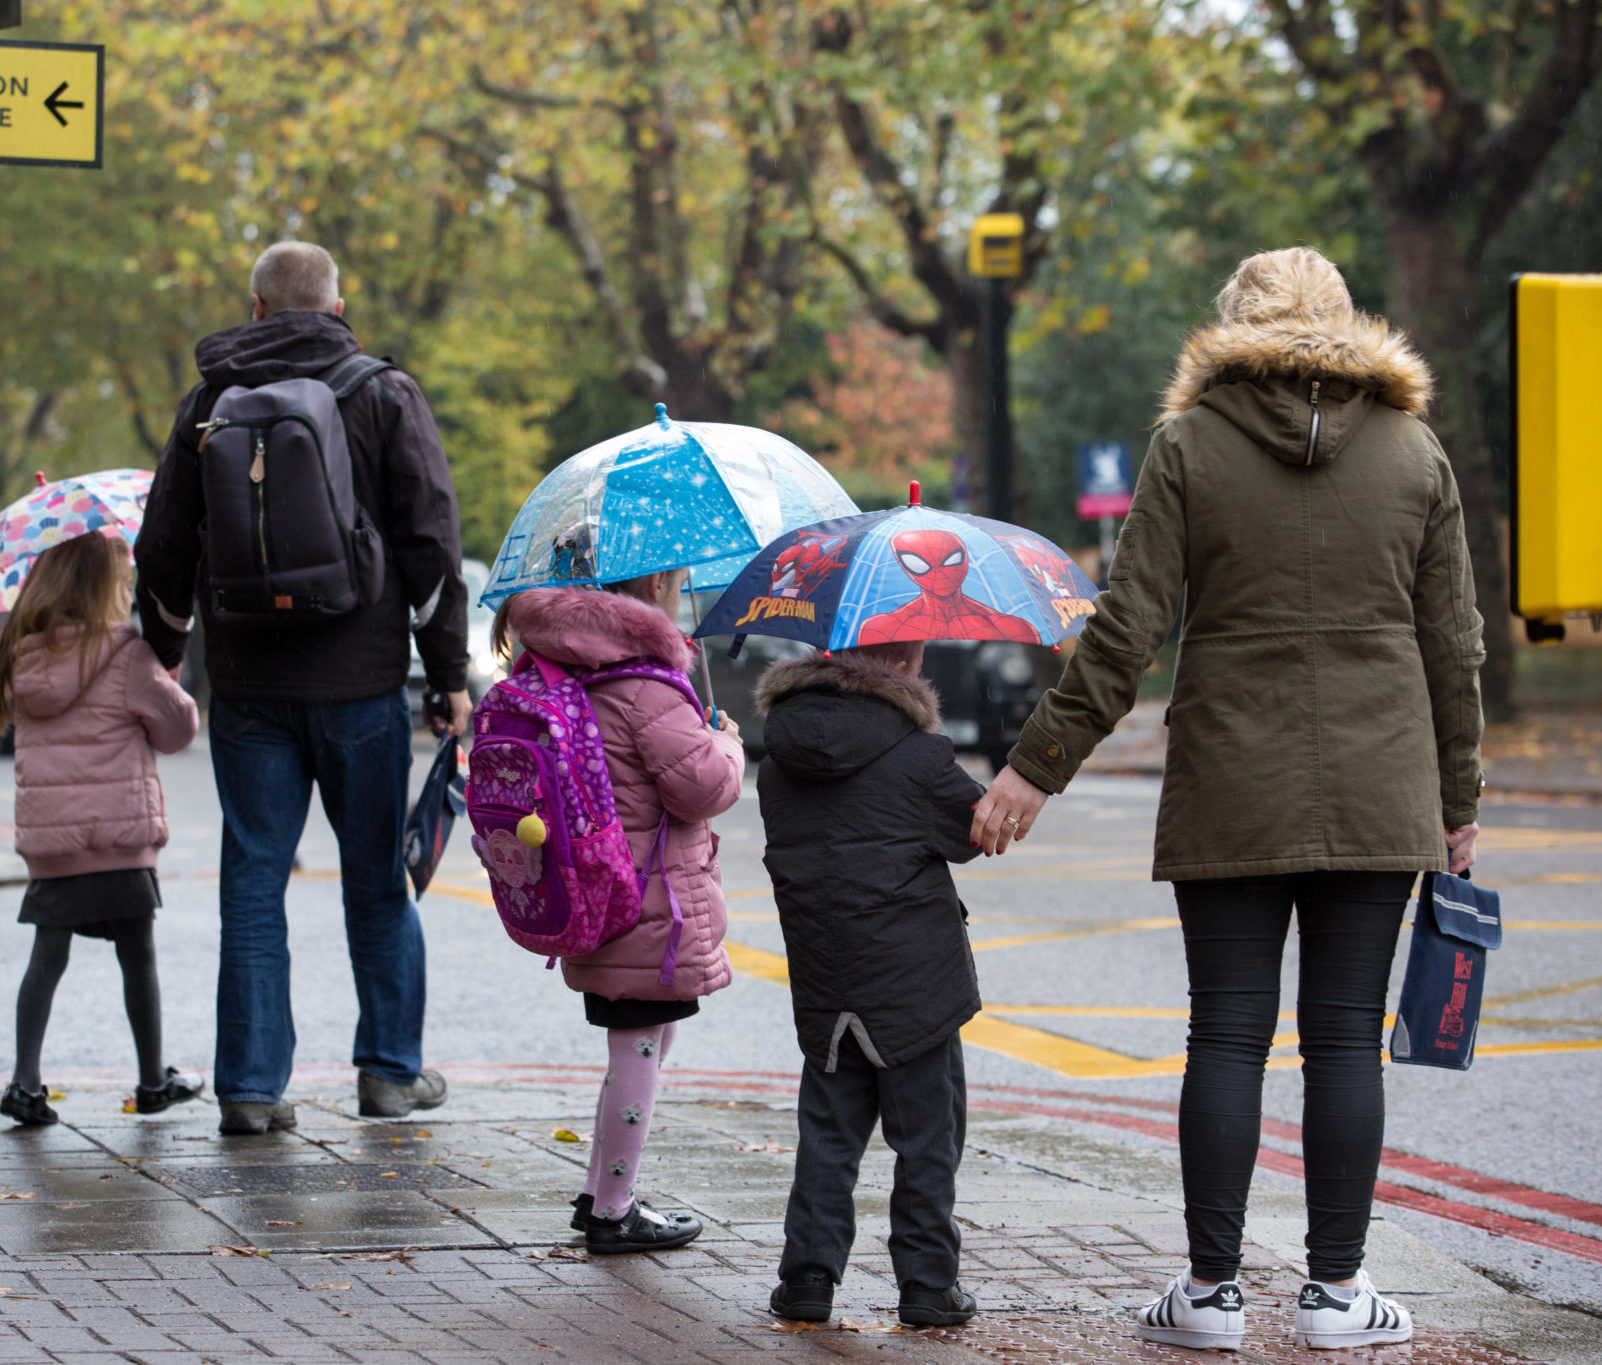 Children walking to school with their parents in London, England in November 2018.